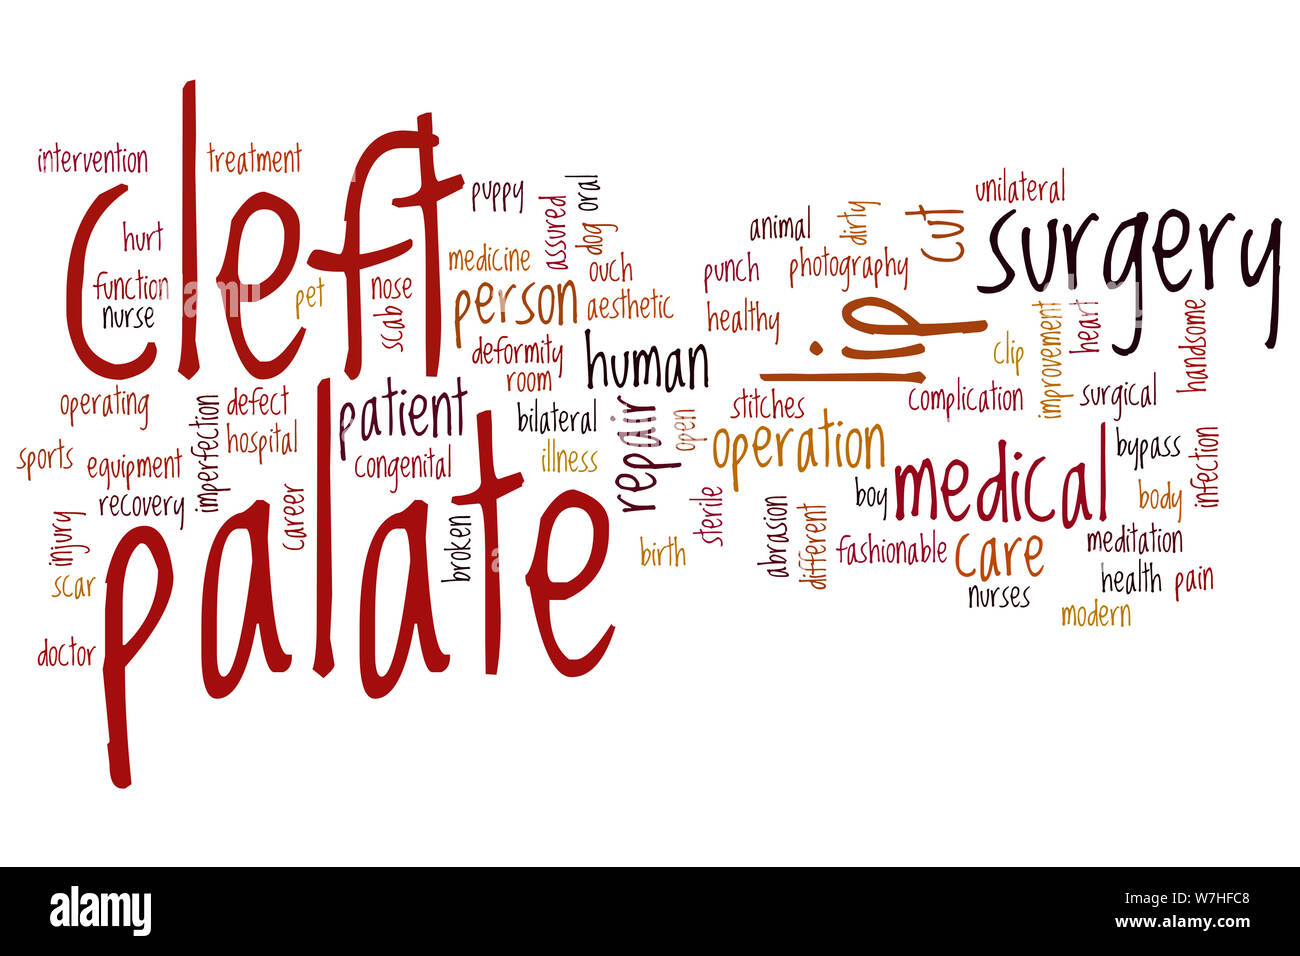 Cleft palate word cloud concept Stock Photo